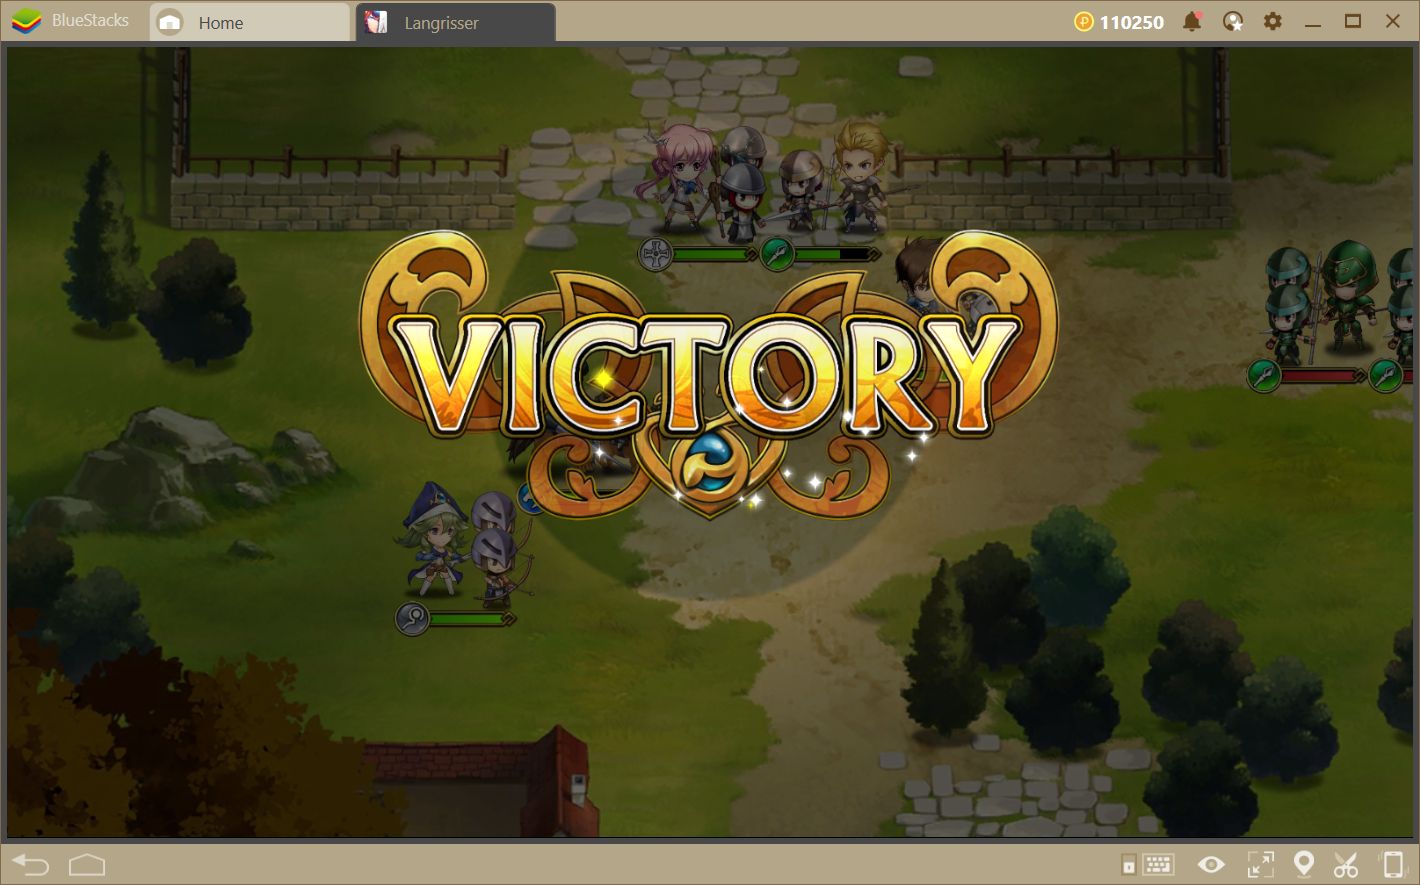 Langrisser on BlueStacks—Simple and Comfortable